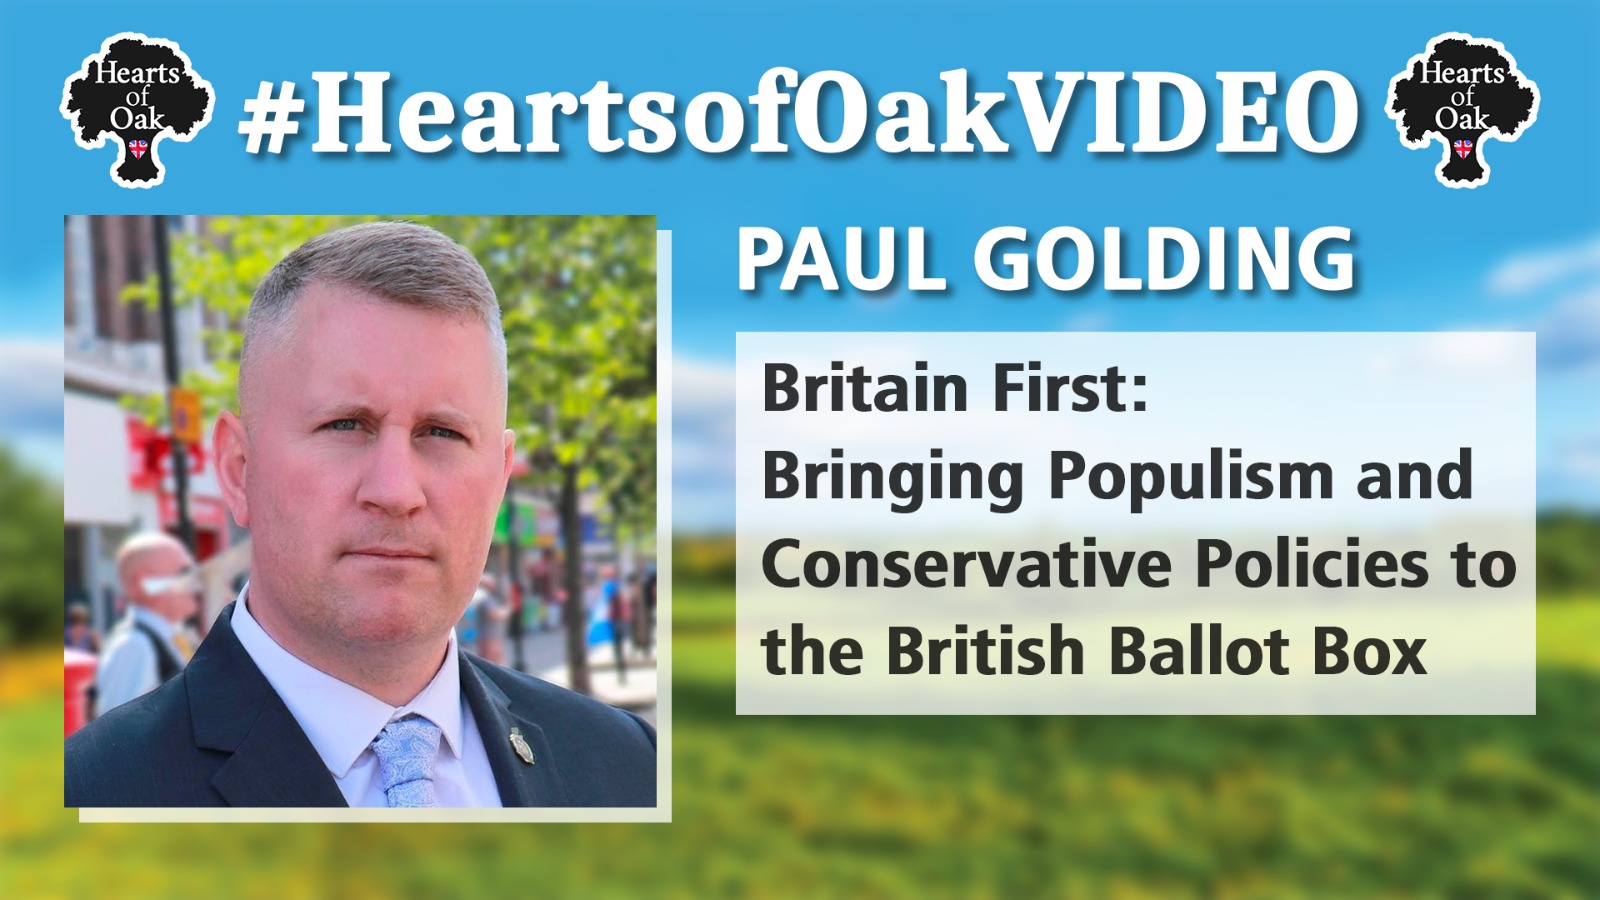 Paul Golding – Britain First: Bringing Populism and Conservative Policies to the British Ballot Box